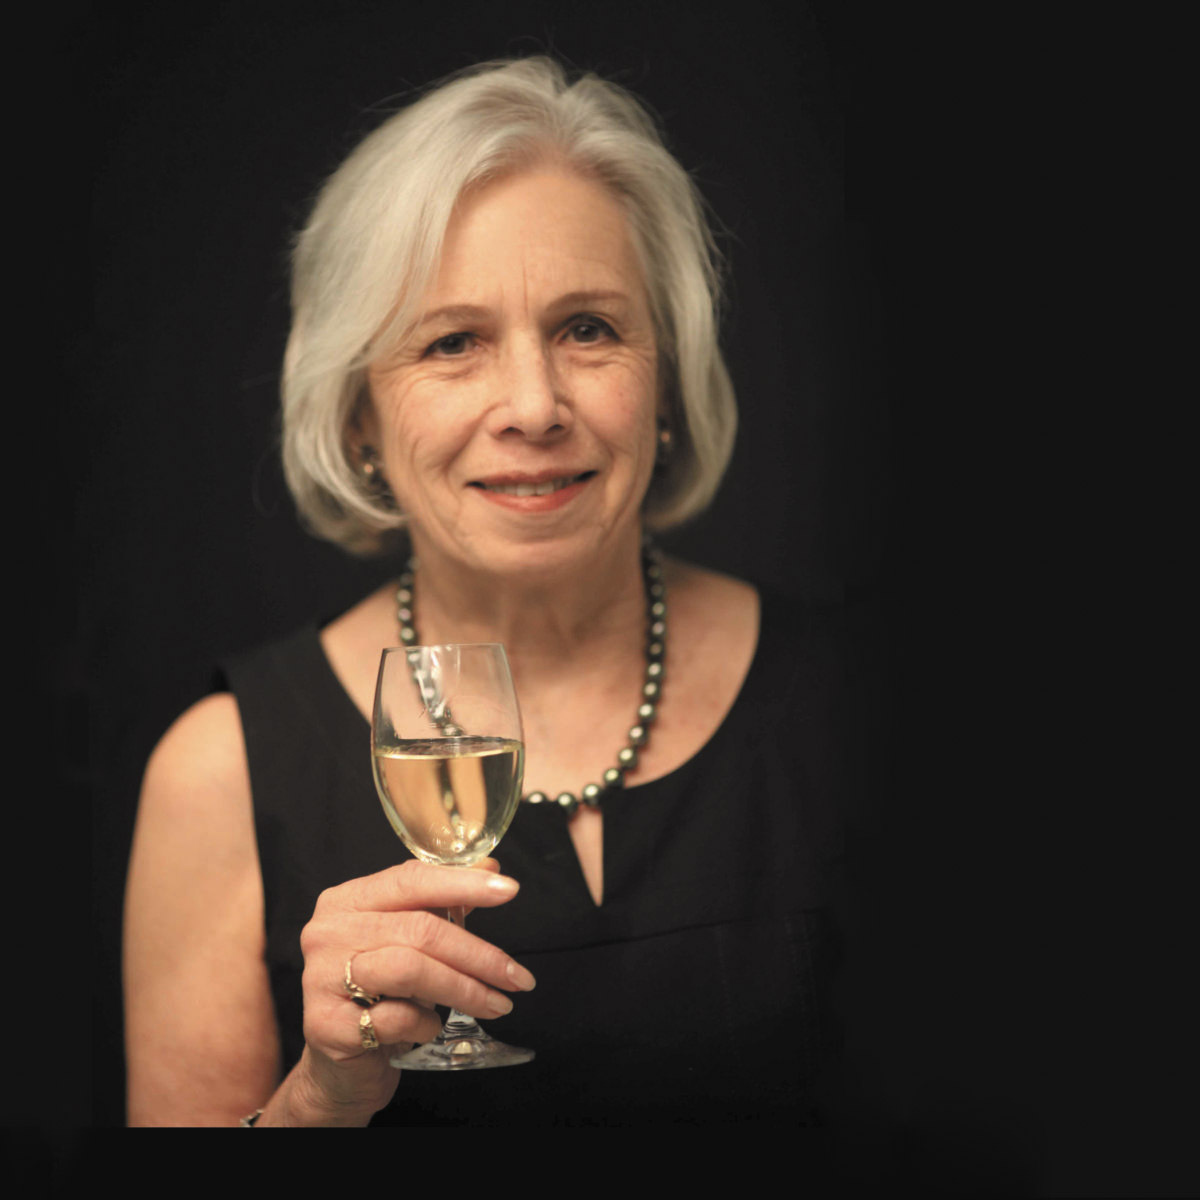 Food and wine writer Florence Fabricant. © FRED R. CONRAD/THE NEW YORK TIMES